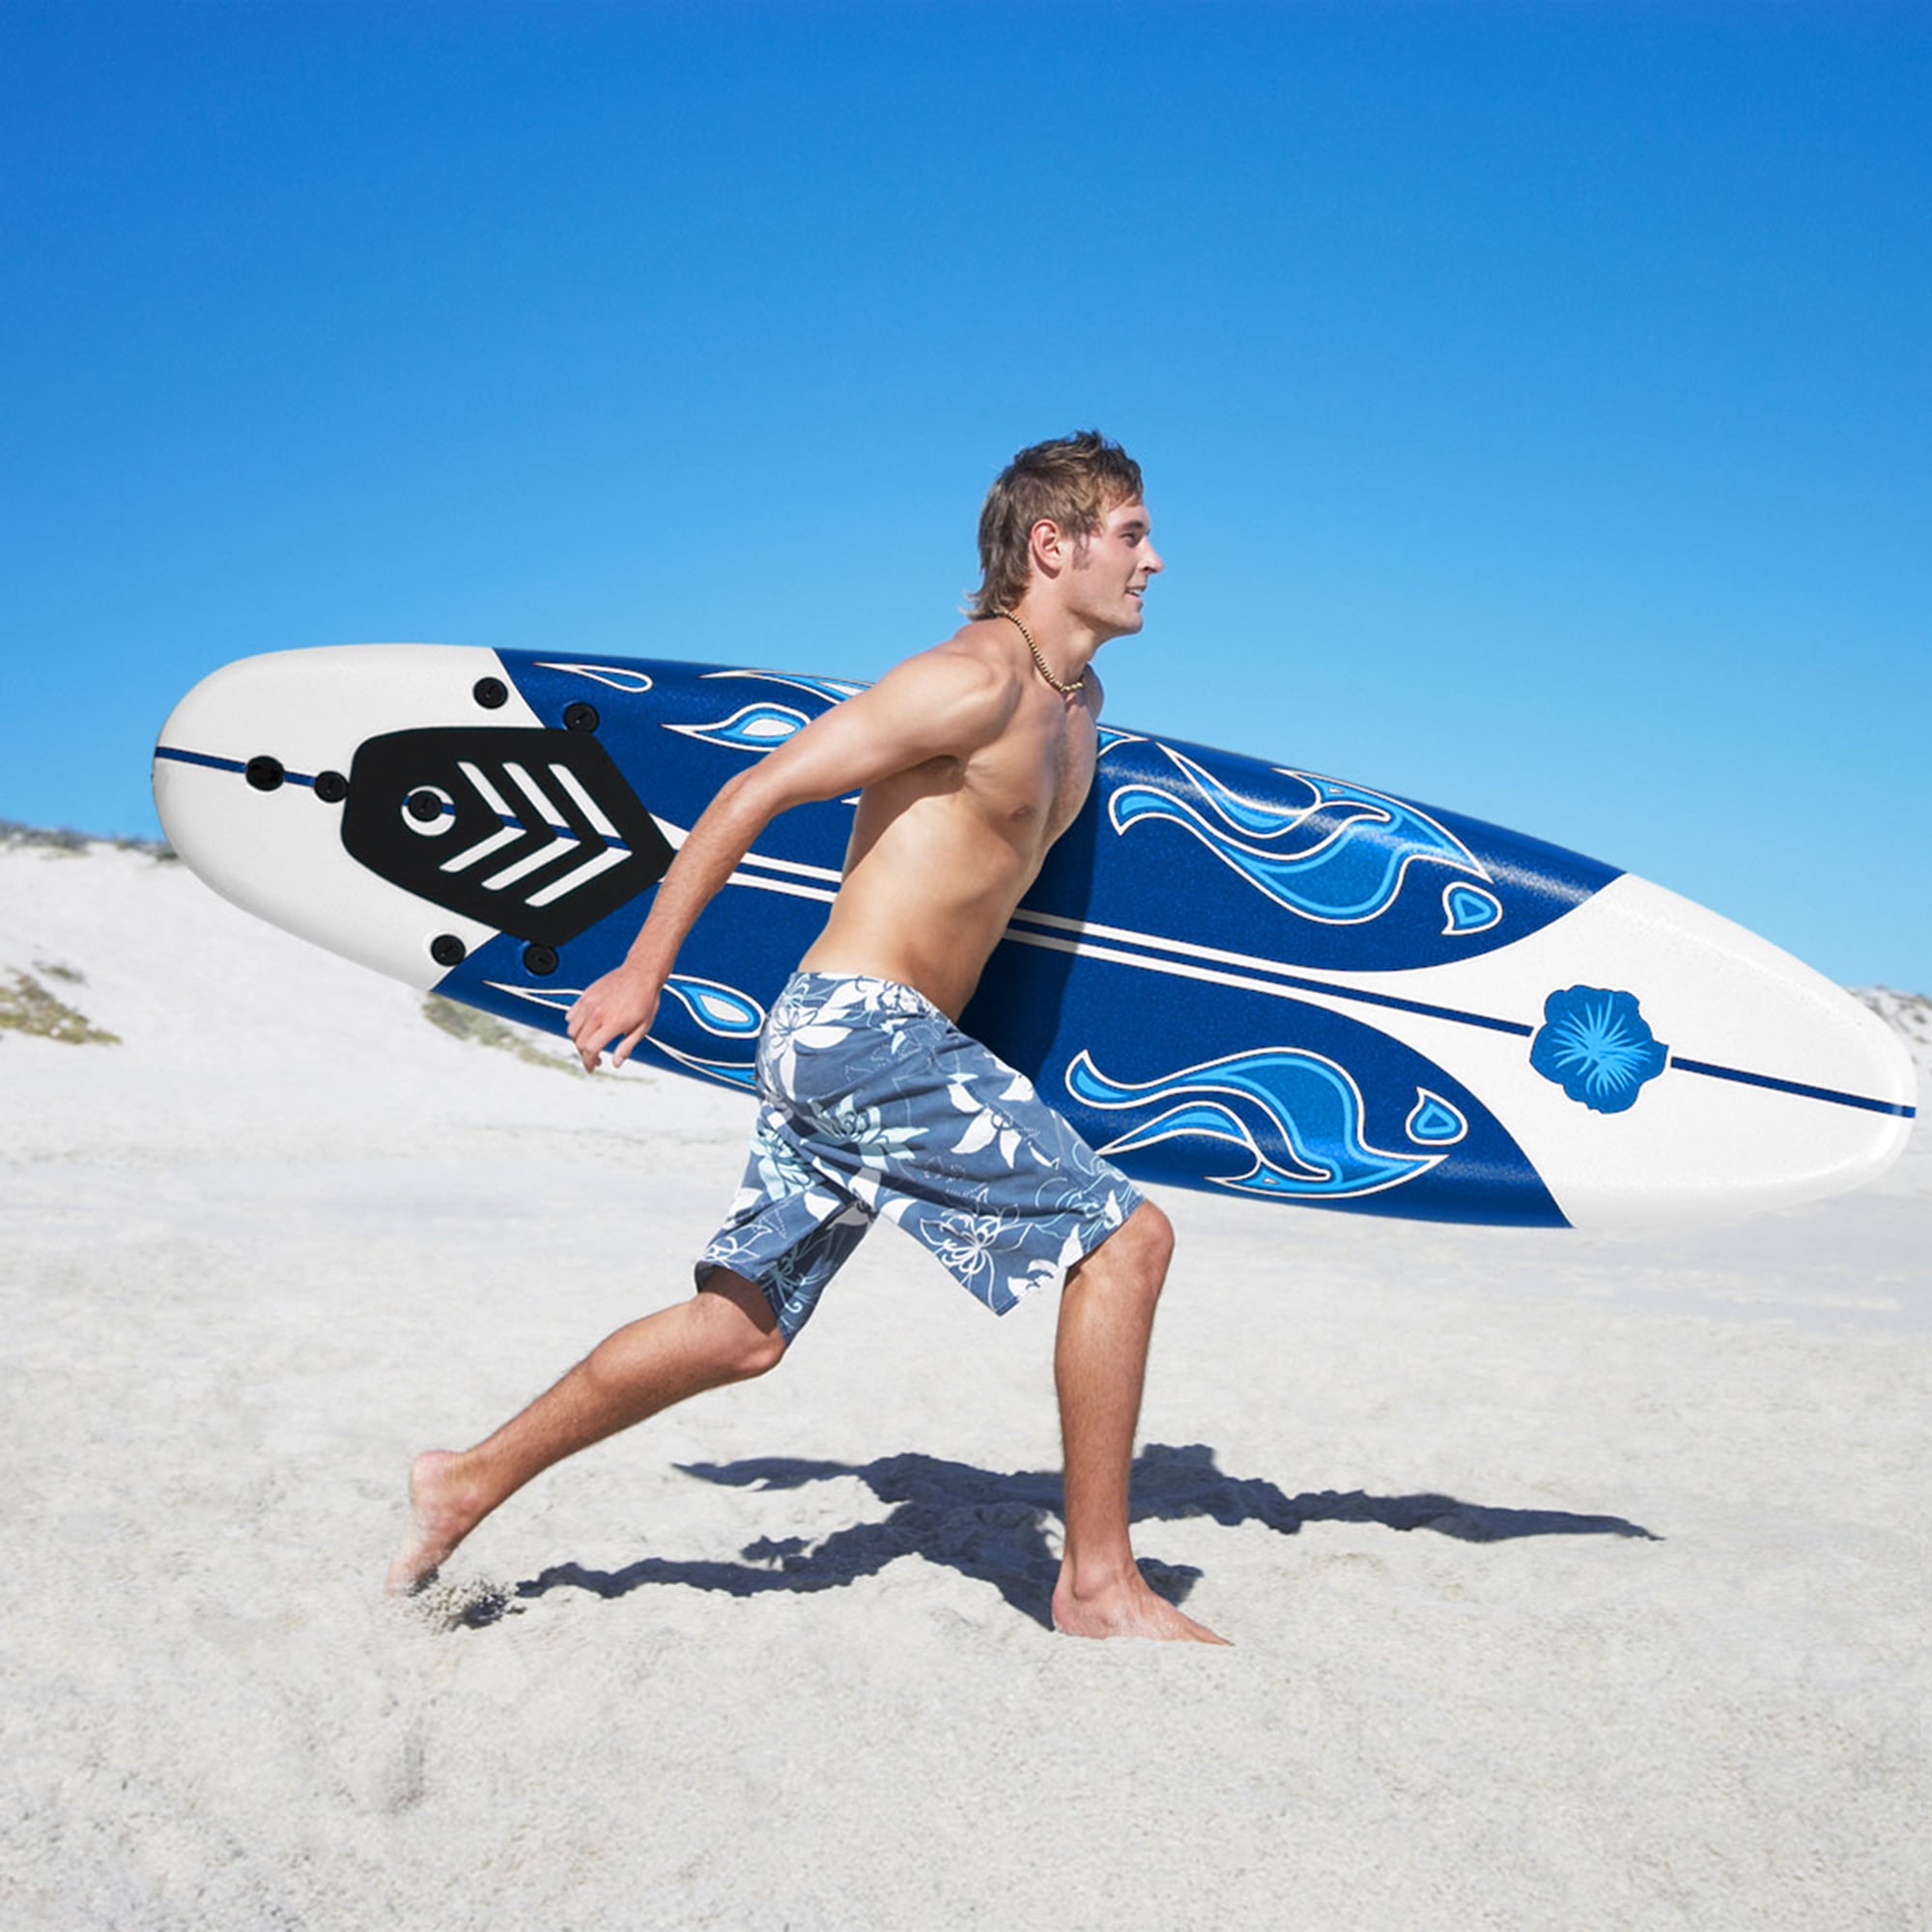 6ft Surfing Body Board  w/ 3 Removable Fins Safety Leash White 